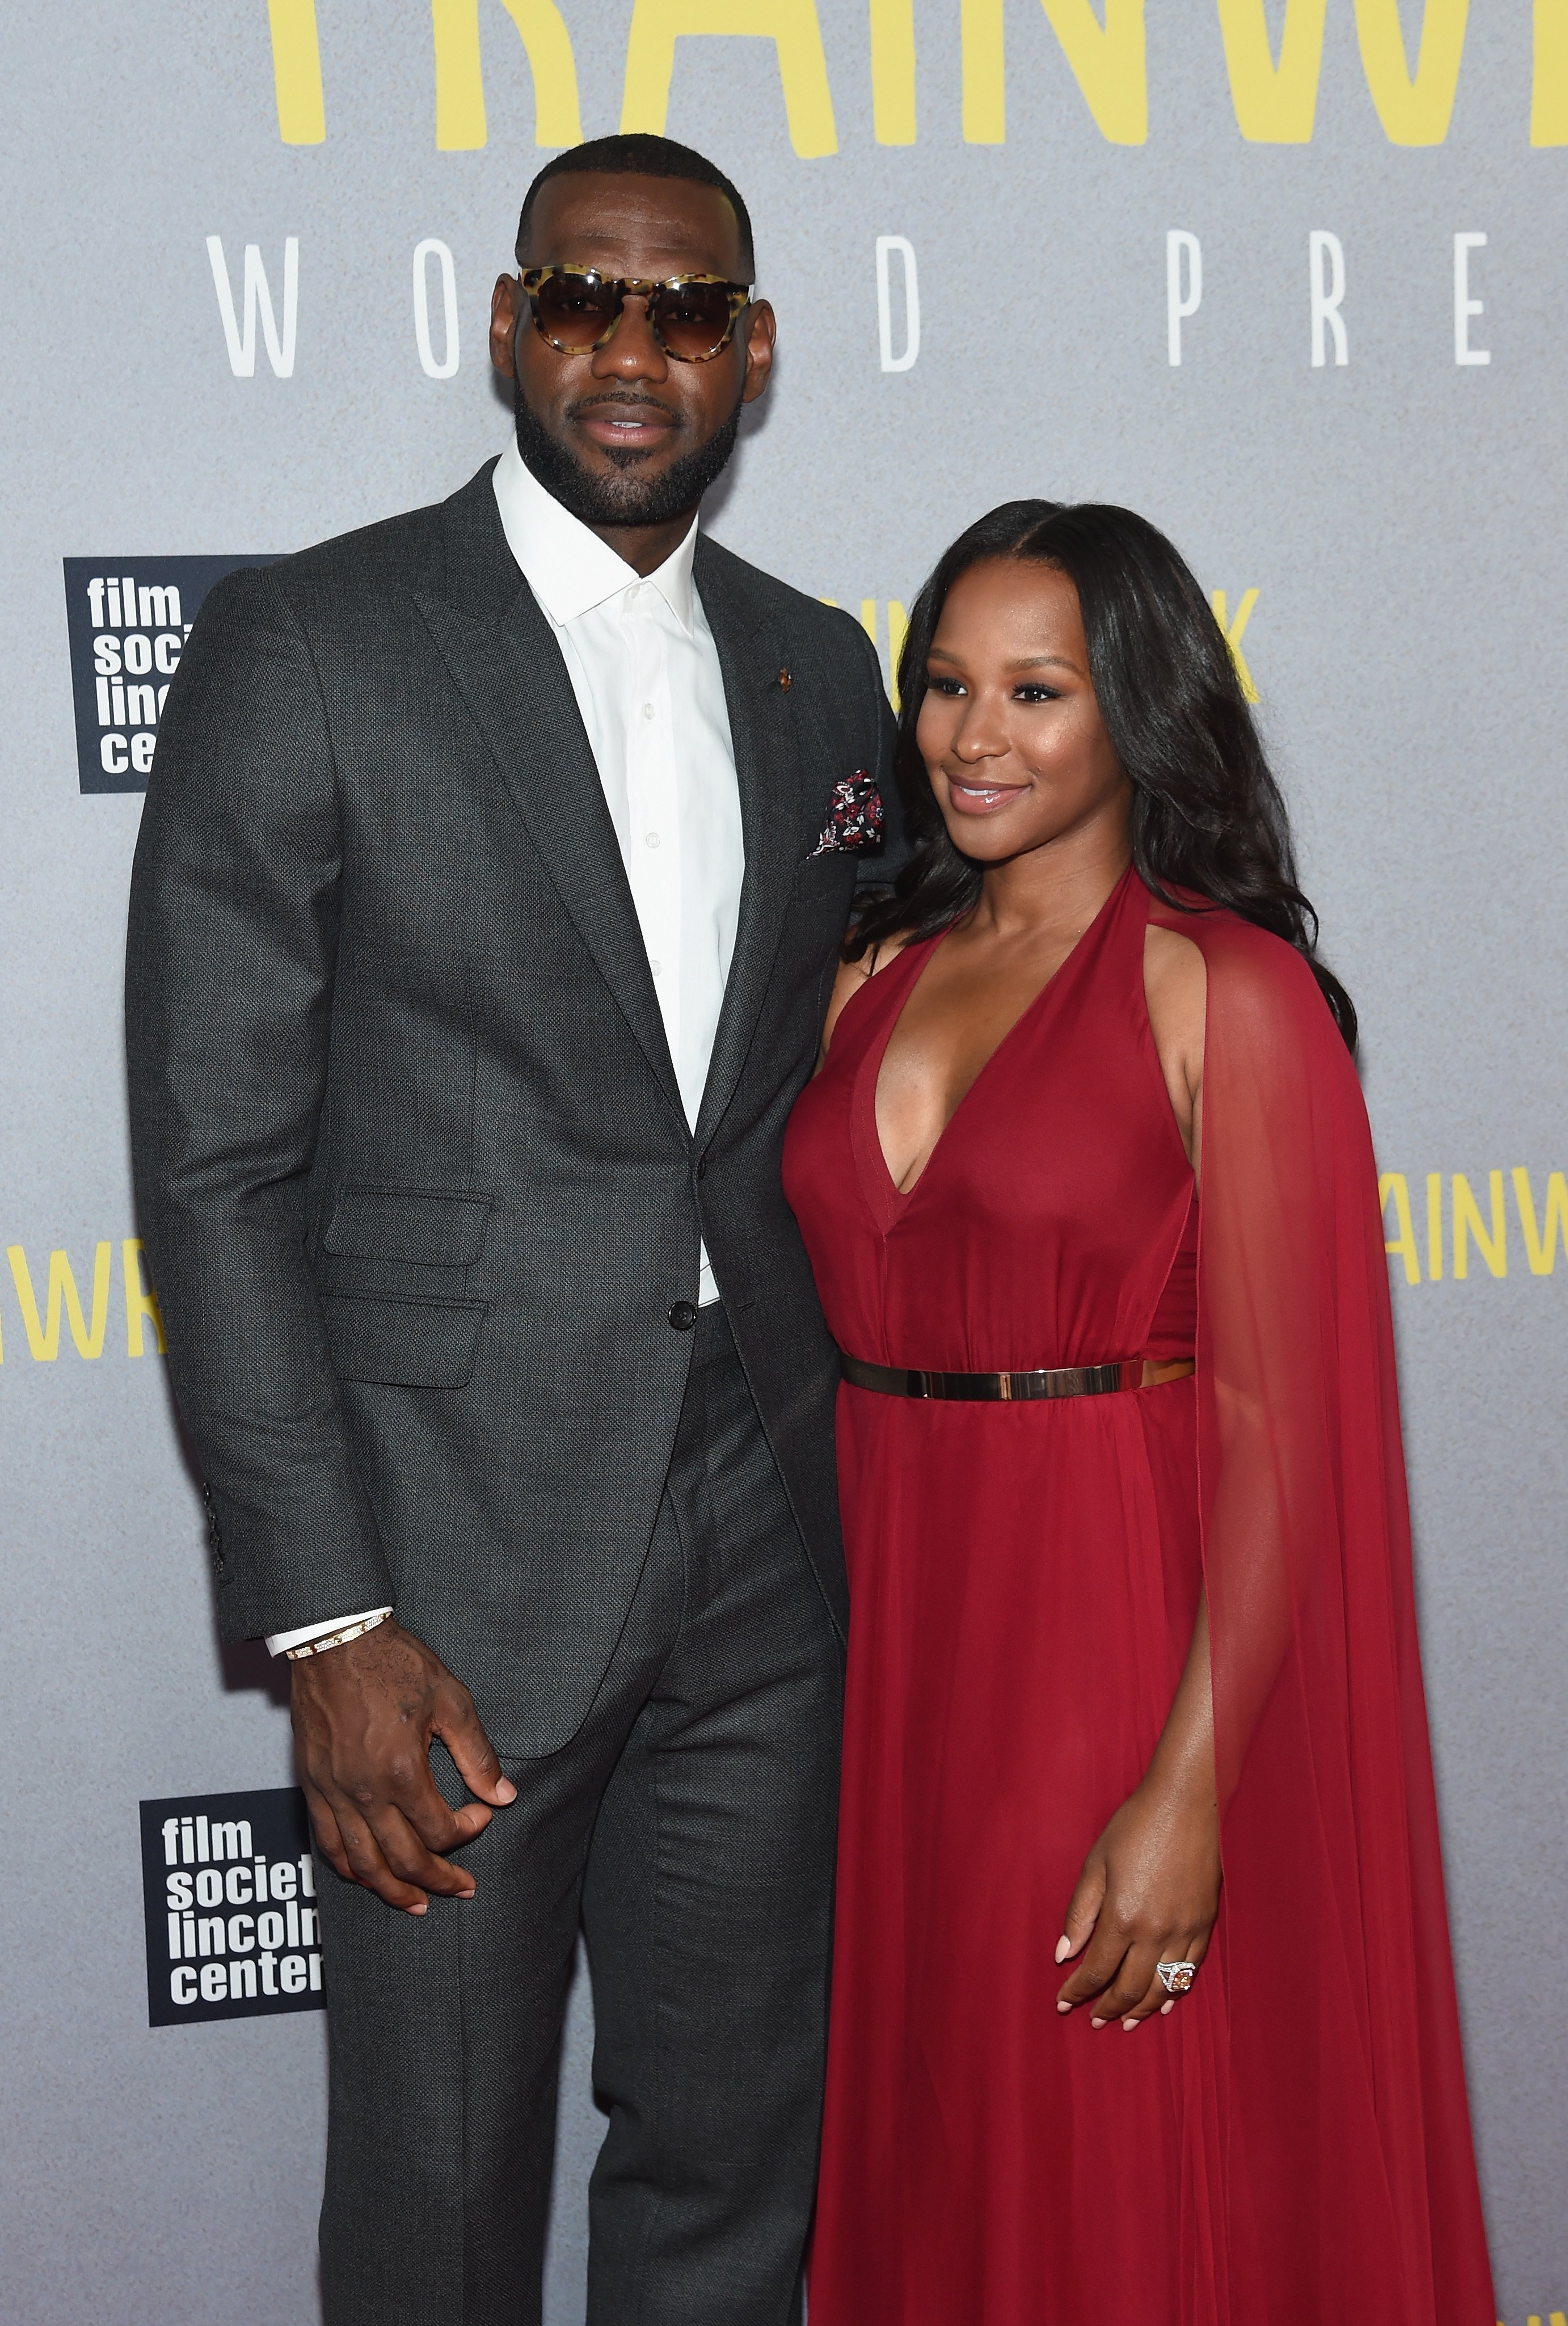 NBA player LeBron James and wife Savannah Brinson attend the "Trainwreck" New York Premiere at Alice Tully Hall | Photo: Getty Images